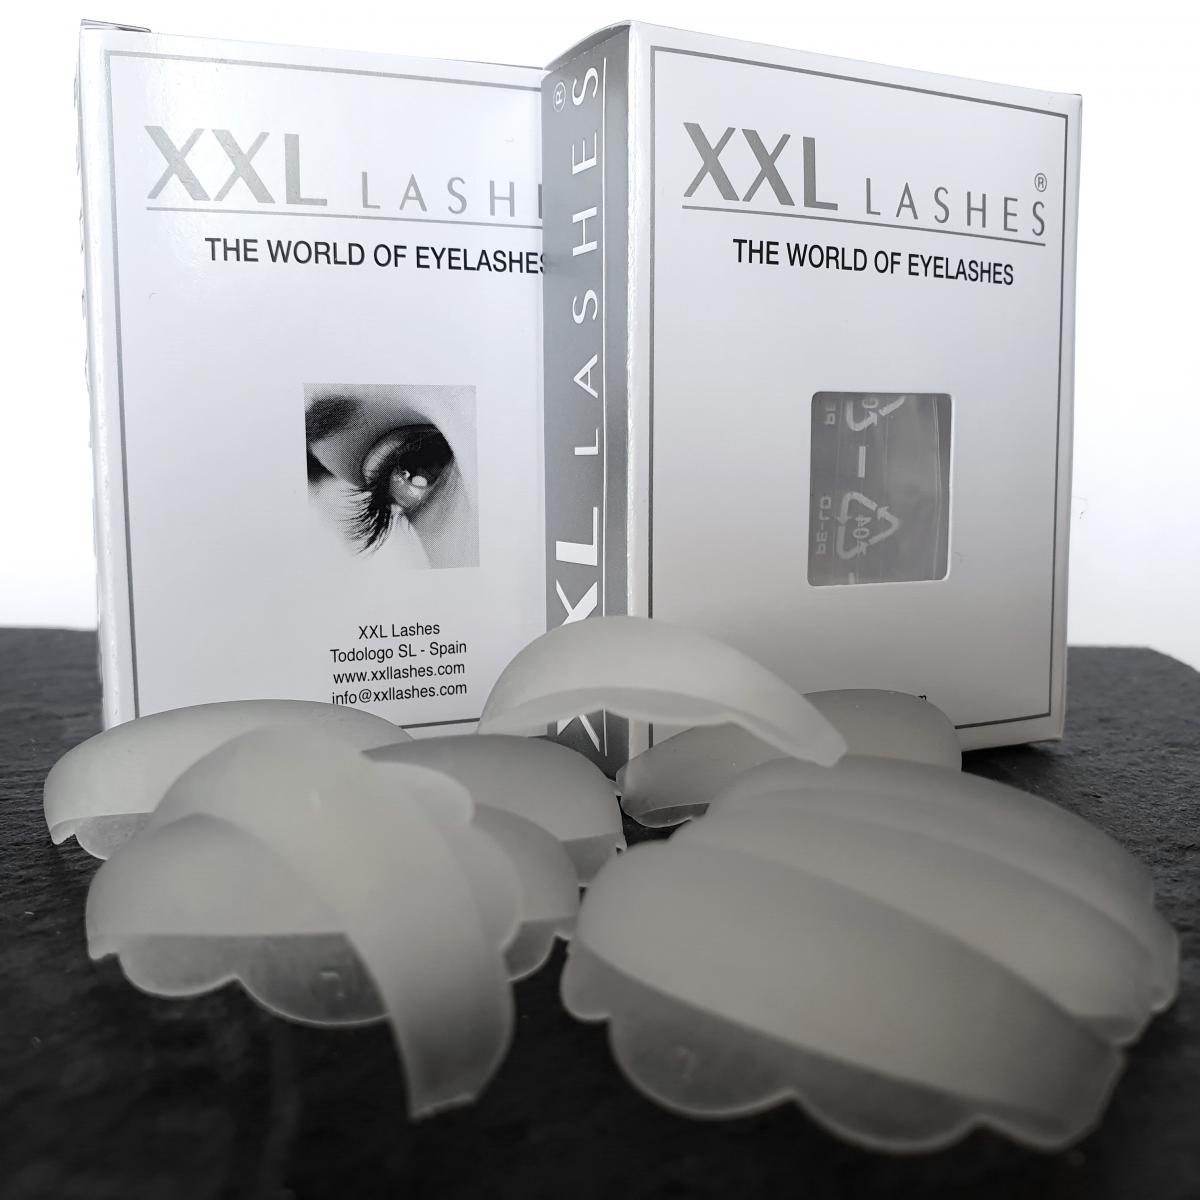 10 Silicon Pads, Size S, M or L -  for Perfect Eyelash Lifting! - Refill pack